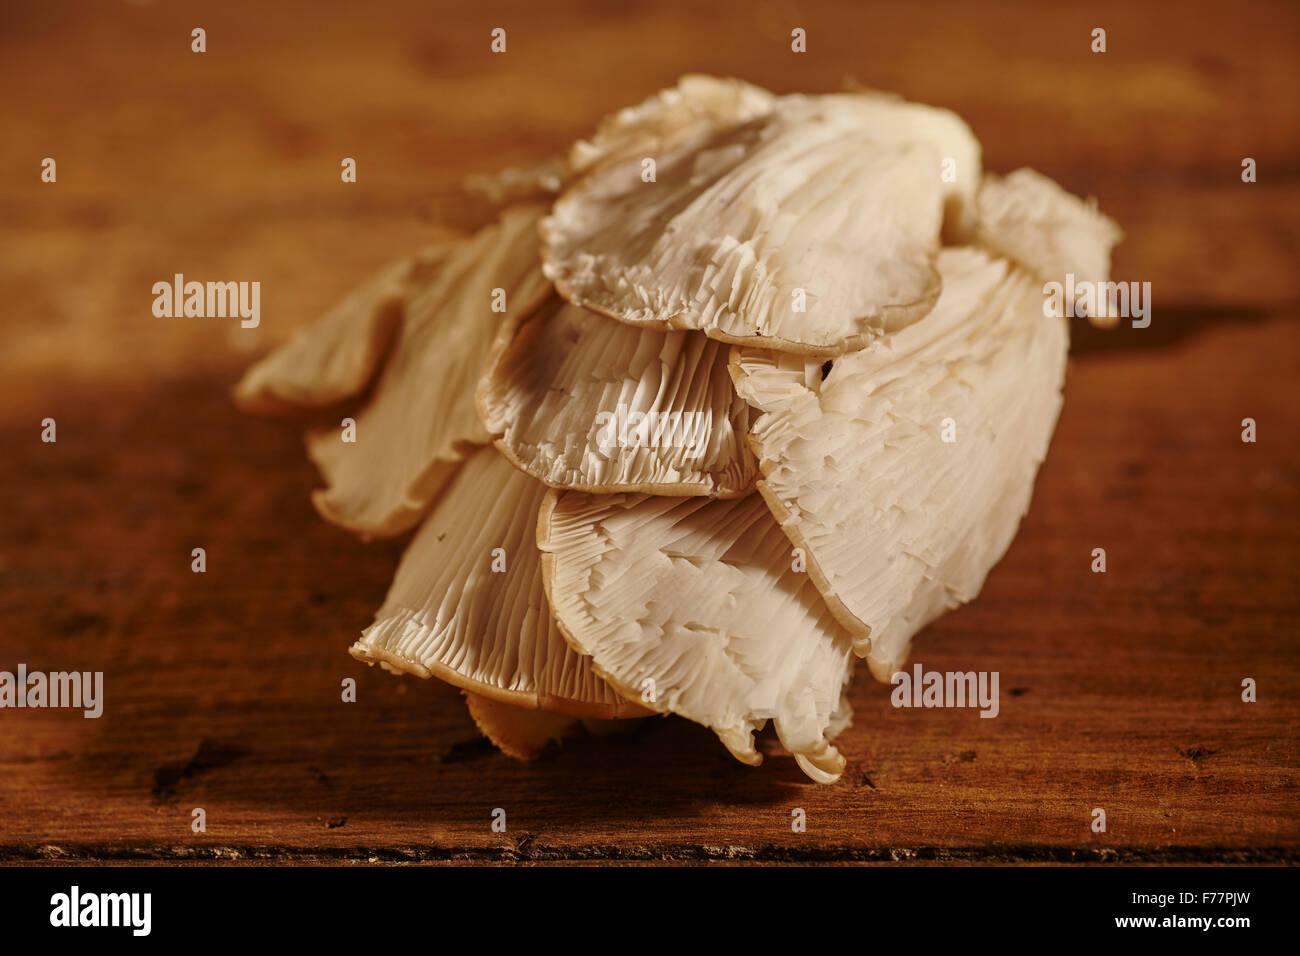 Cultivated Oyster Mushrooms From Pennsylvania, USA Stock Photo